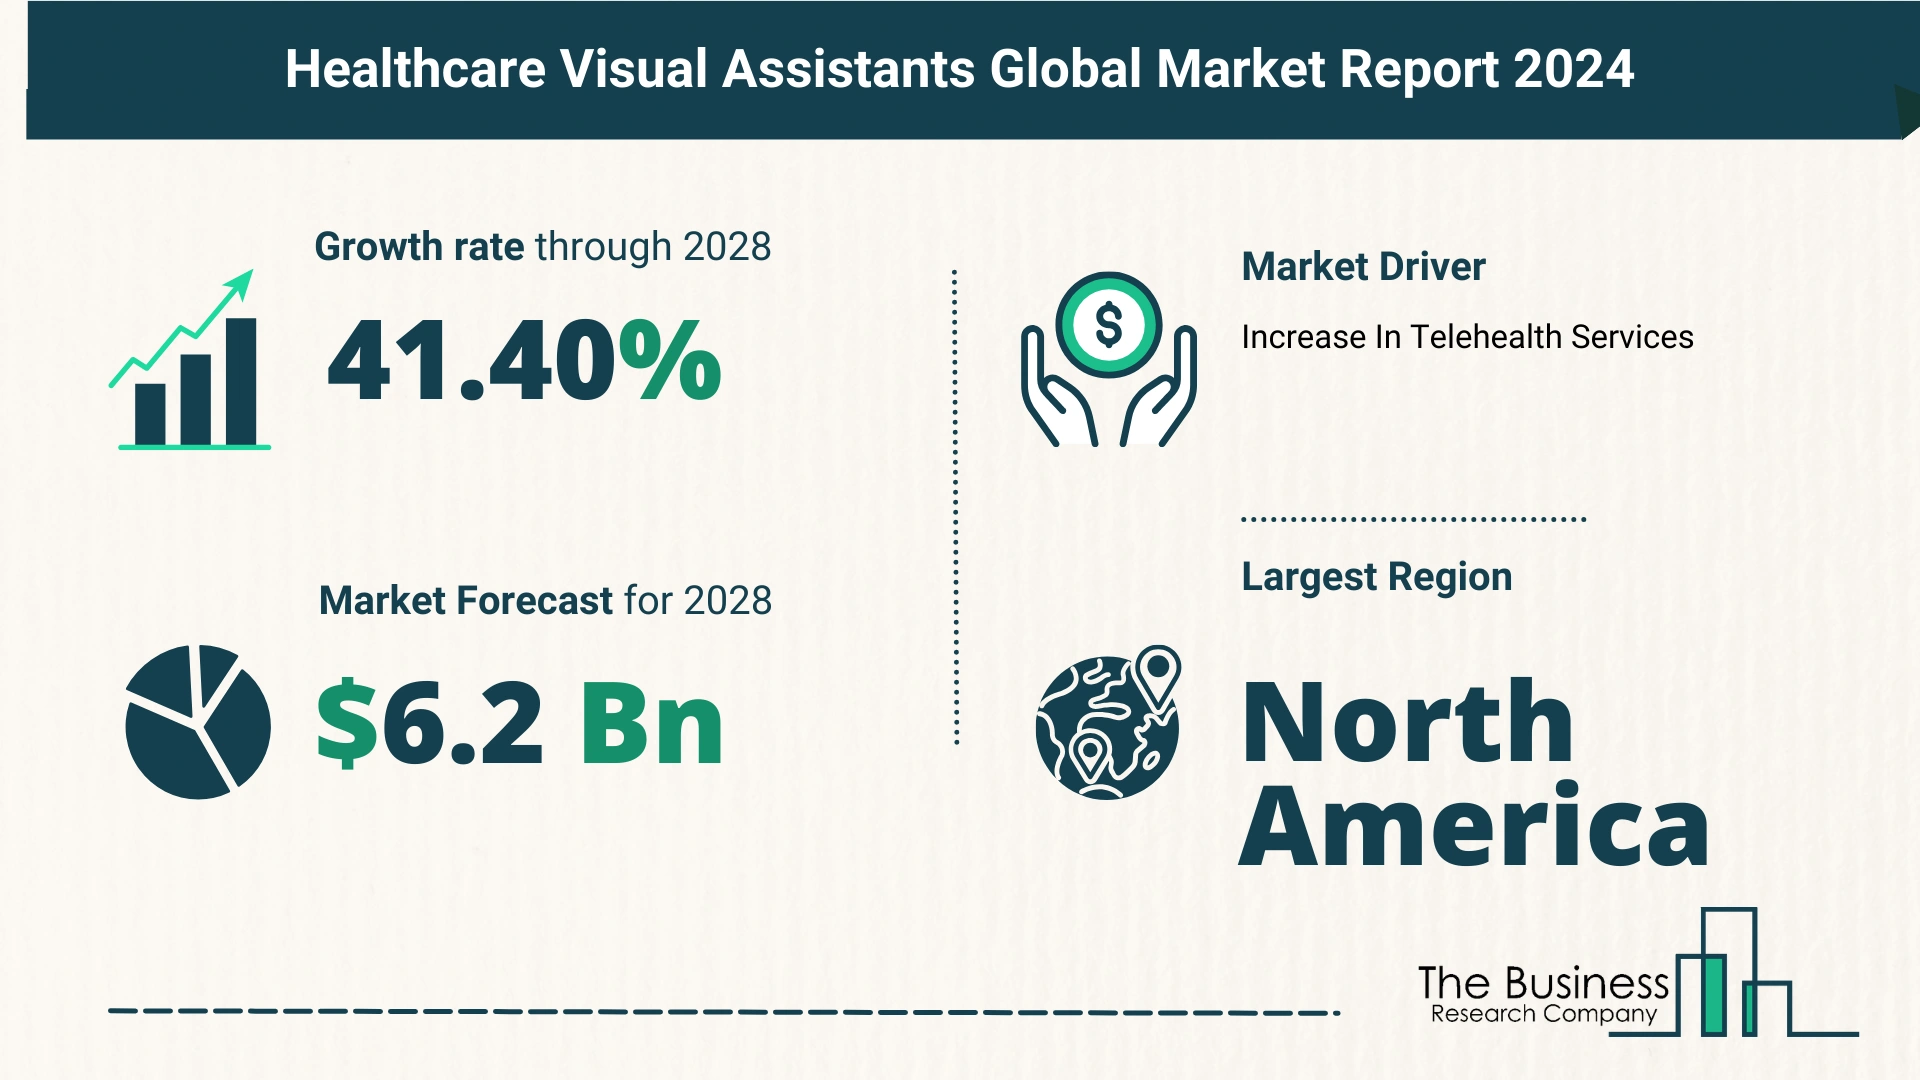 Global Healthcare Visual Assistants Market Overview 2024: Size, Drivers, And Trends